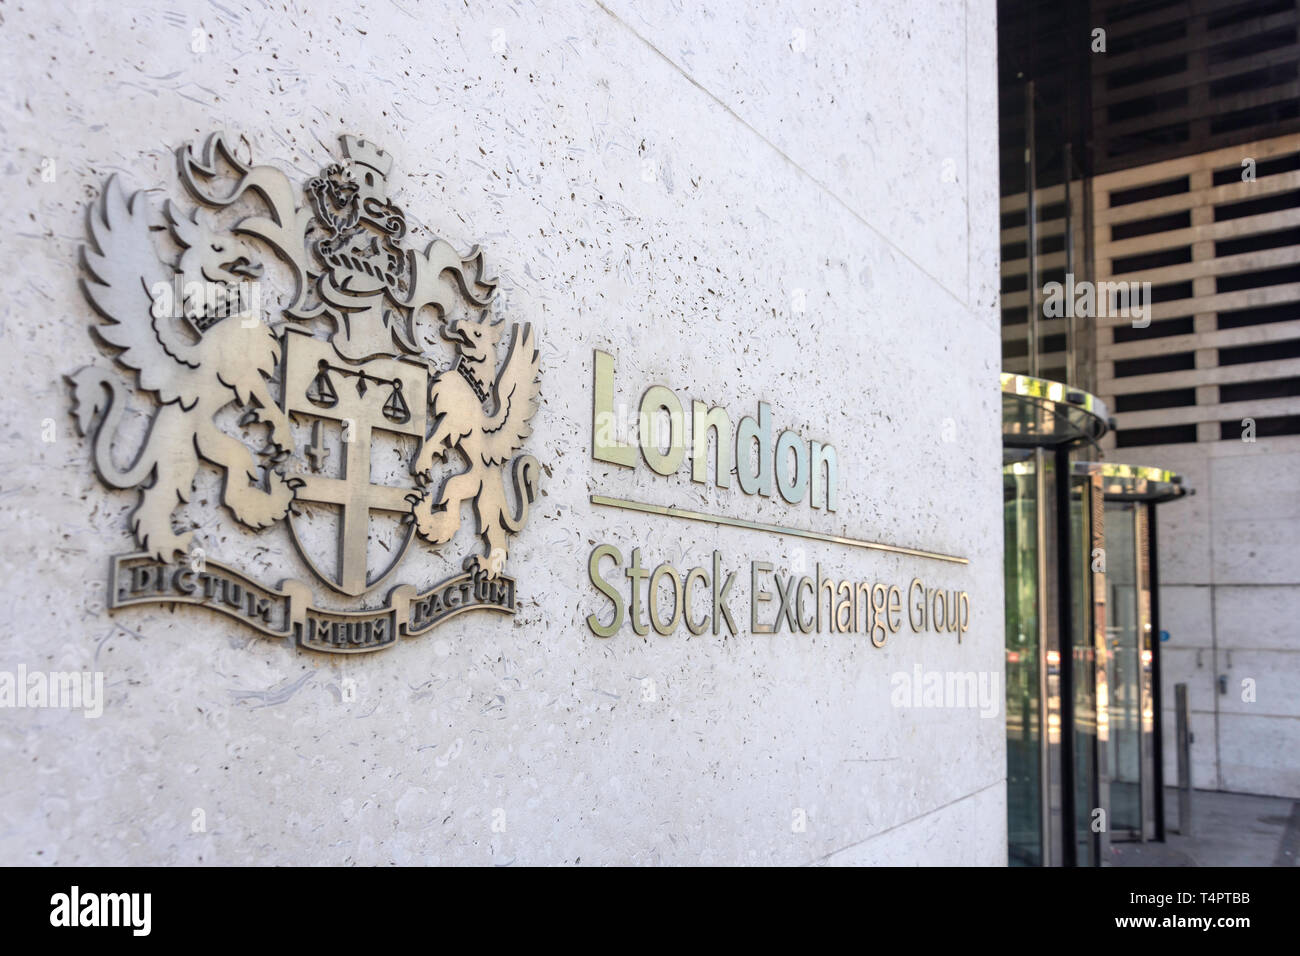 Entrance to The London Stock Exchange, Newgate Street, Paternoster Square, City of London, Greater London, England, United Kingdom Stock Photo